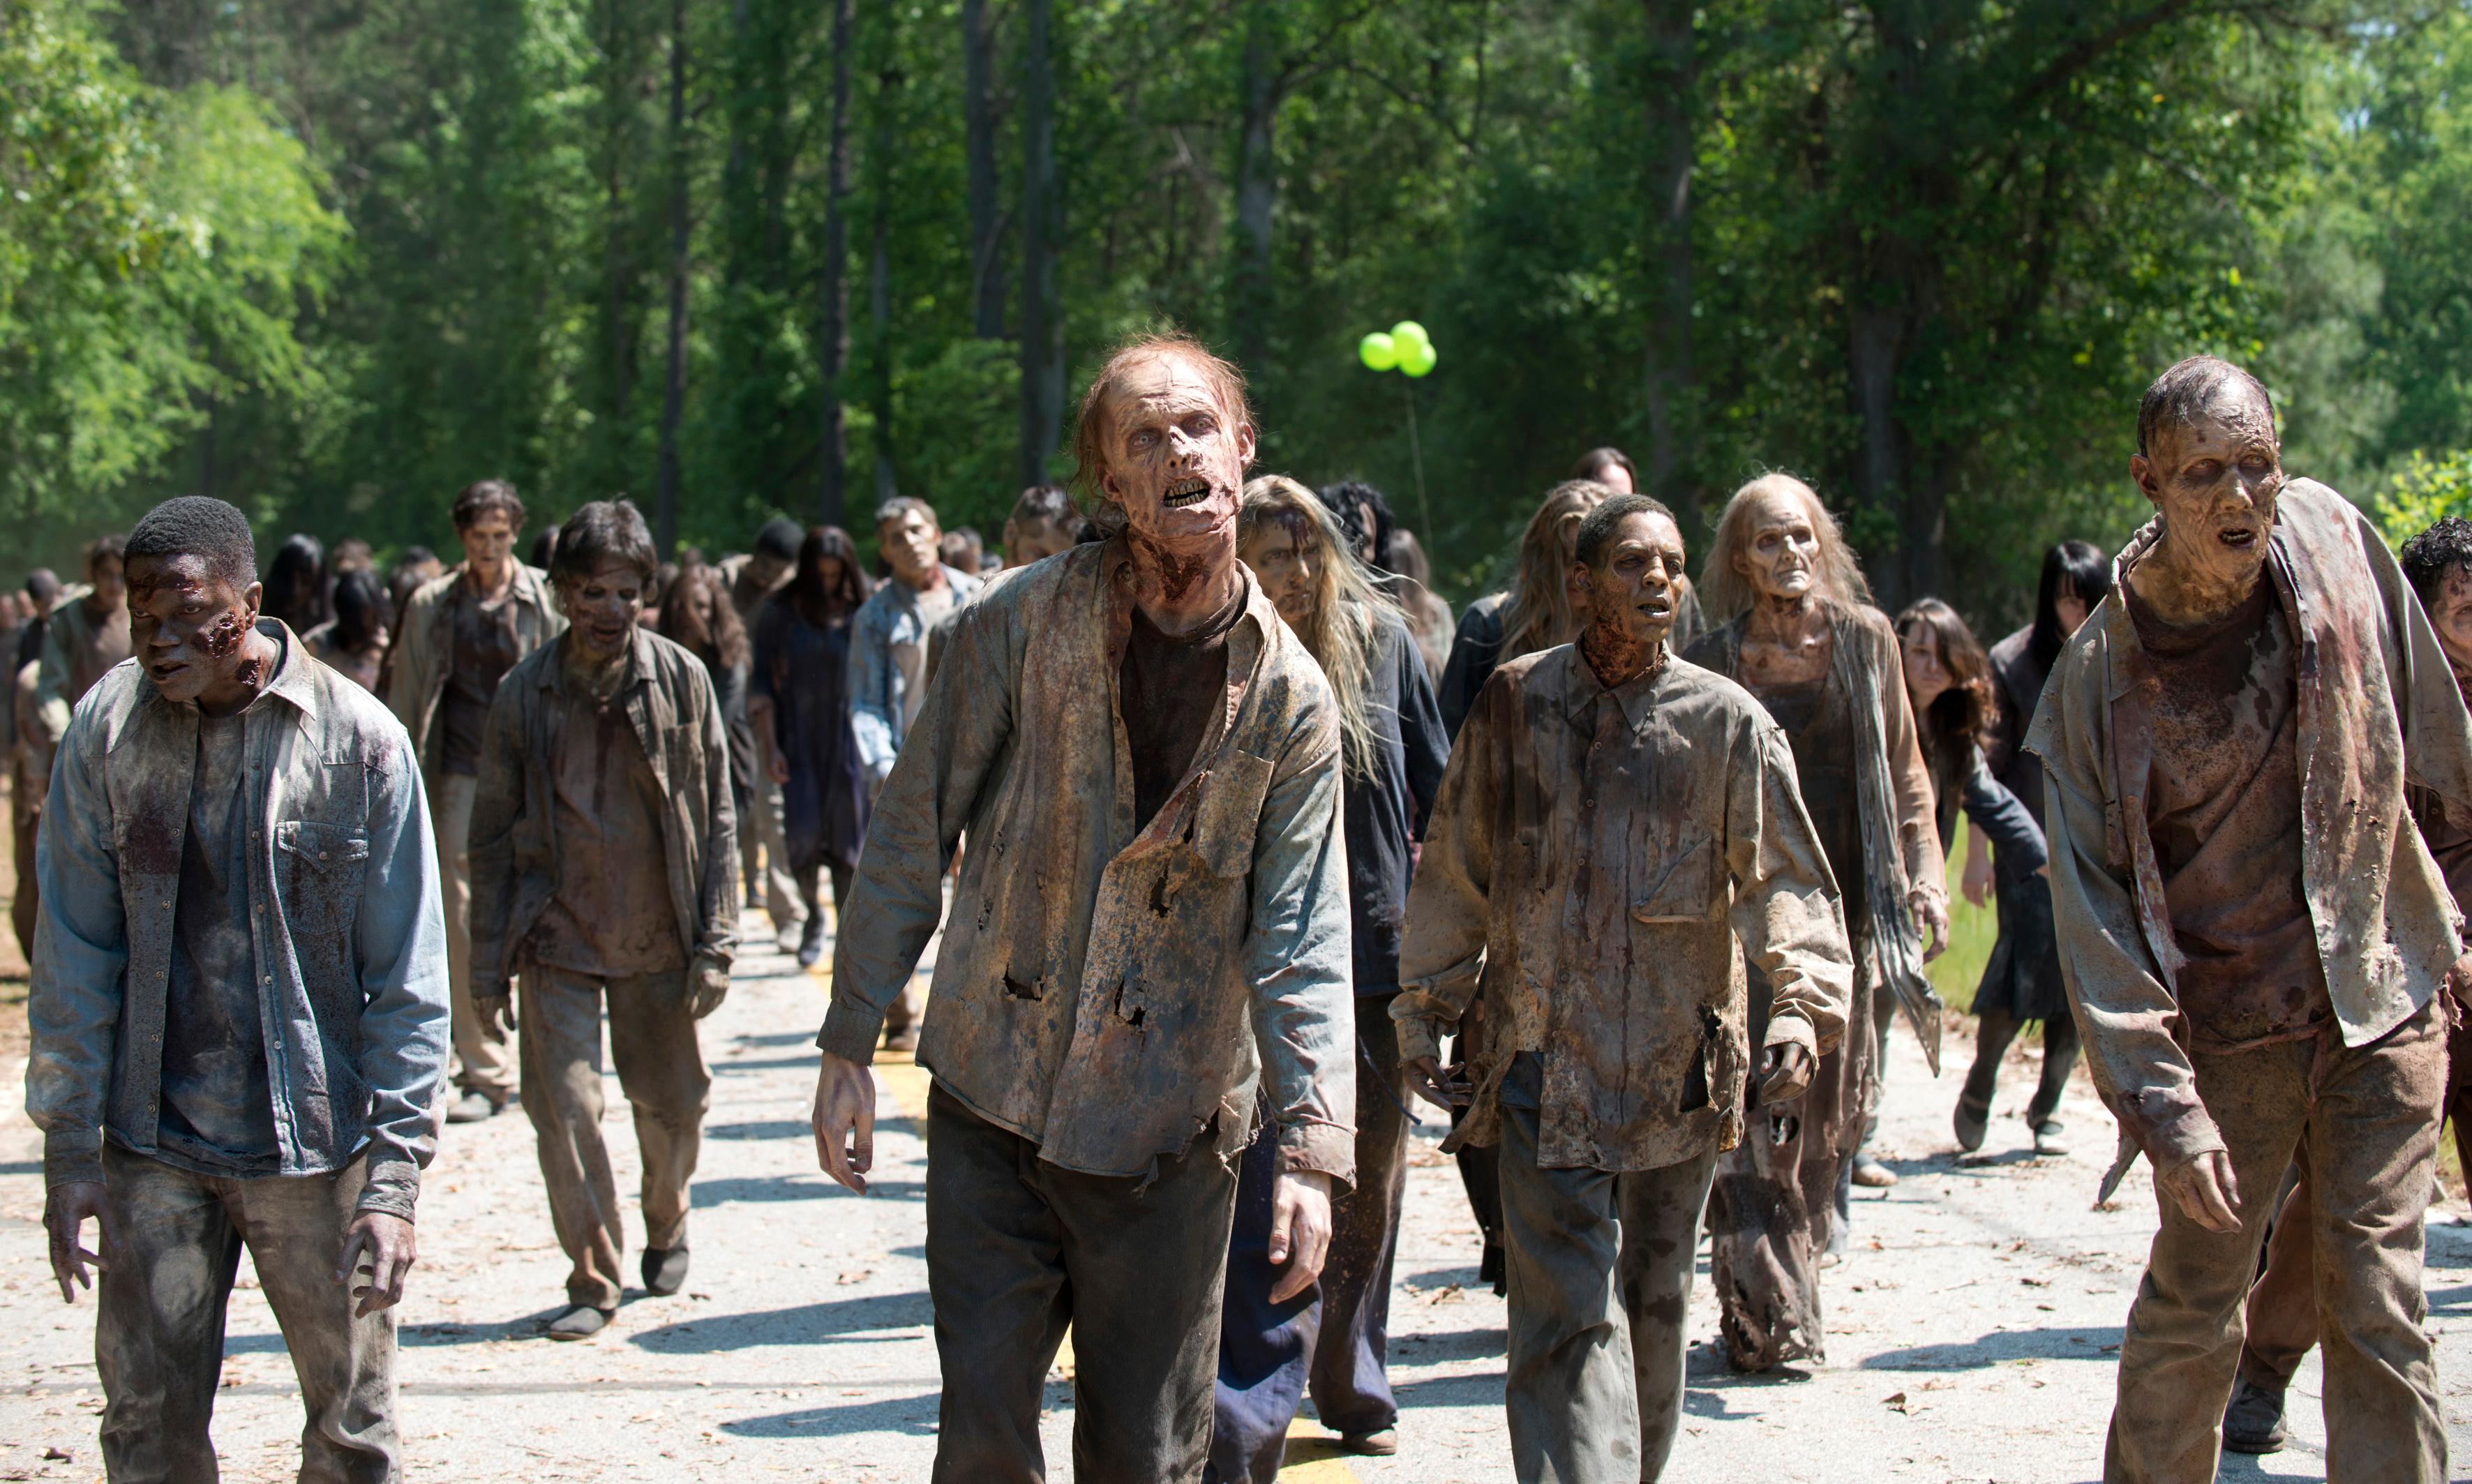 James Cameron's Story of Science Fiction to feature The Walking Dead - Undead Walking